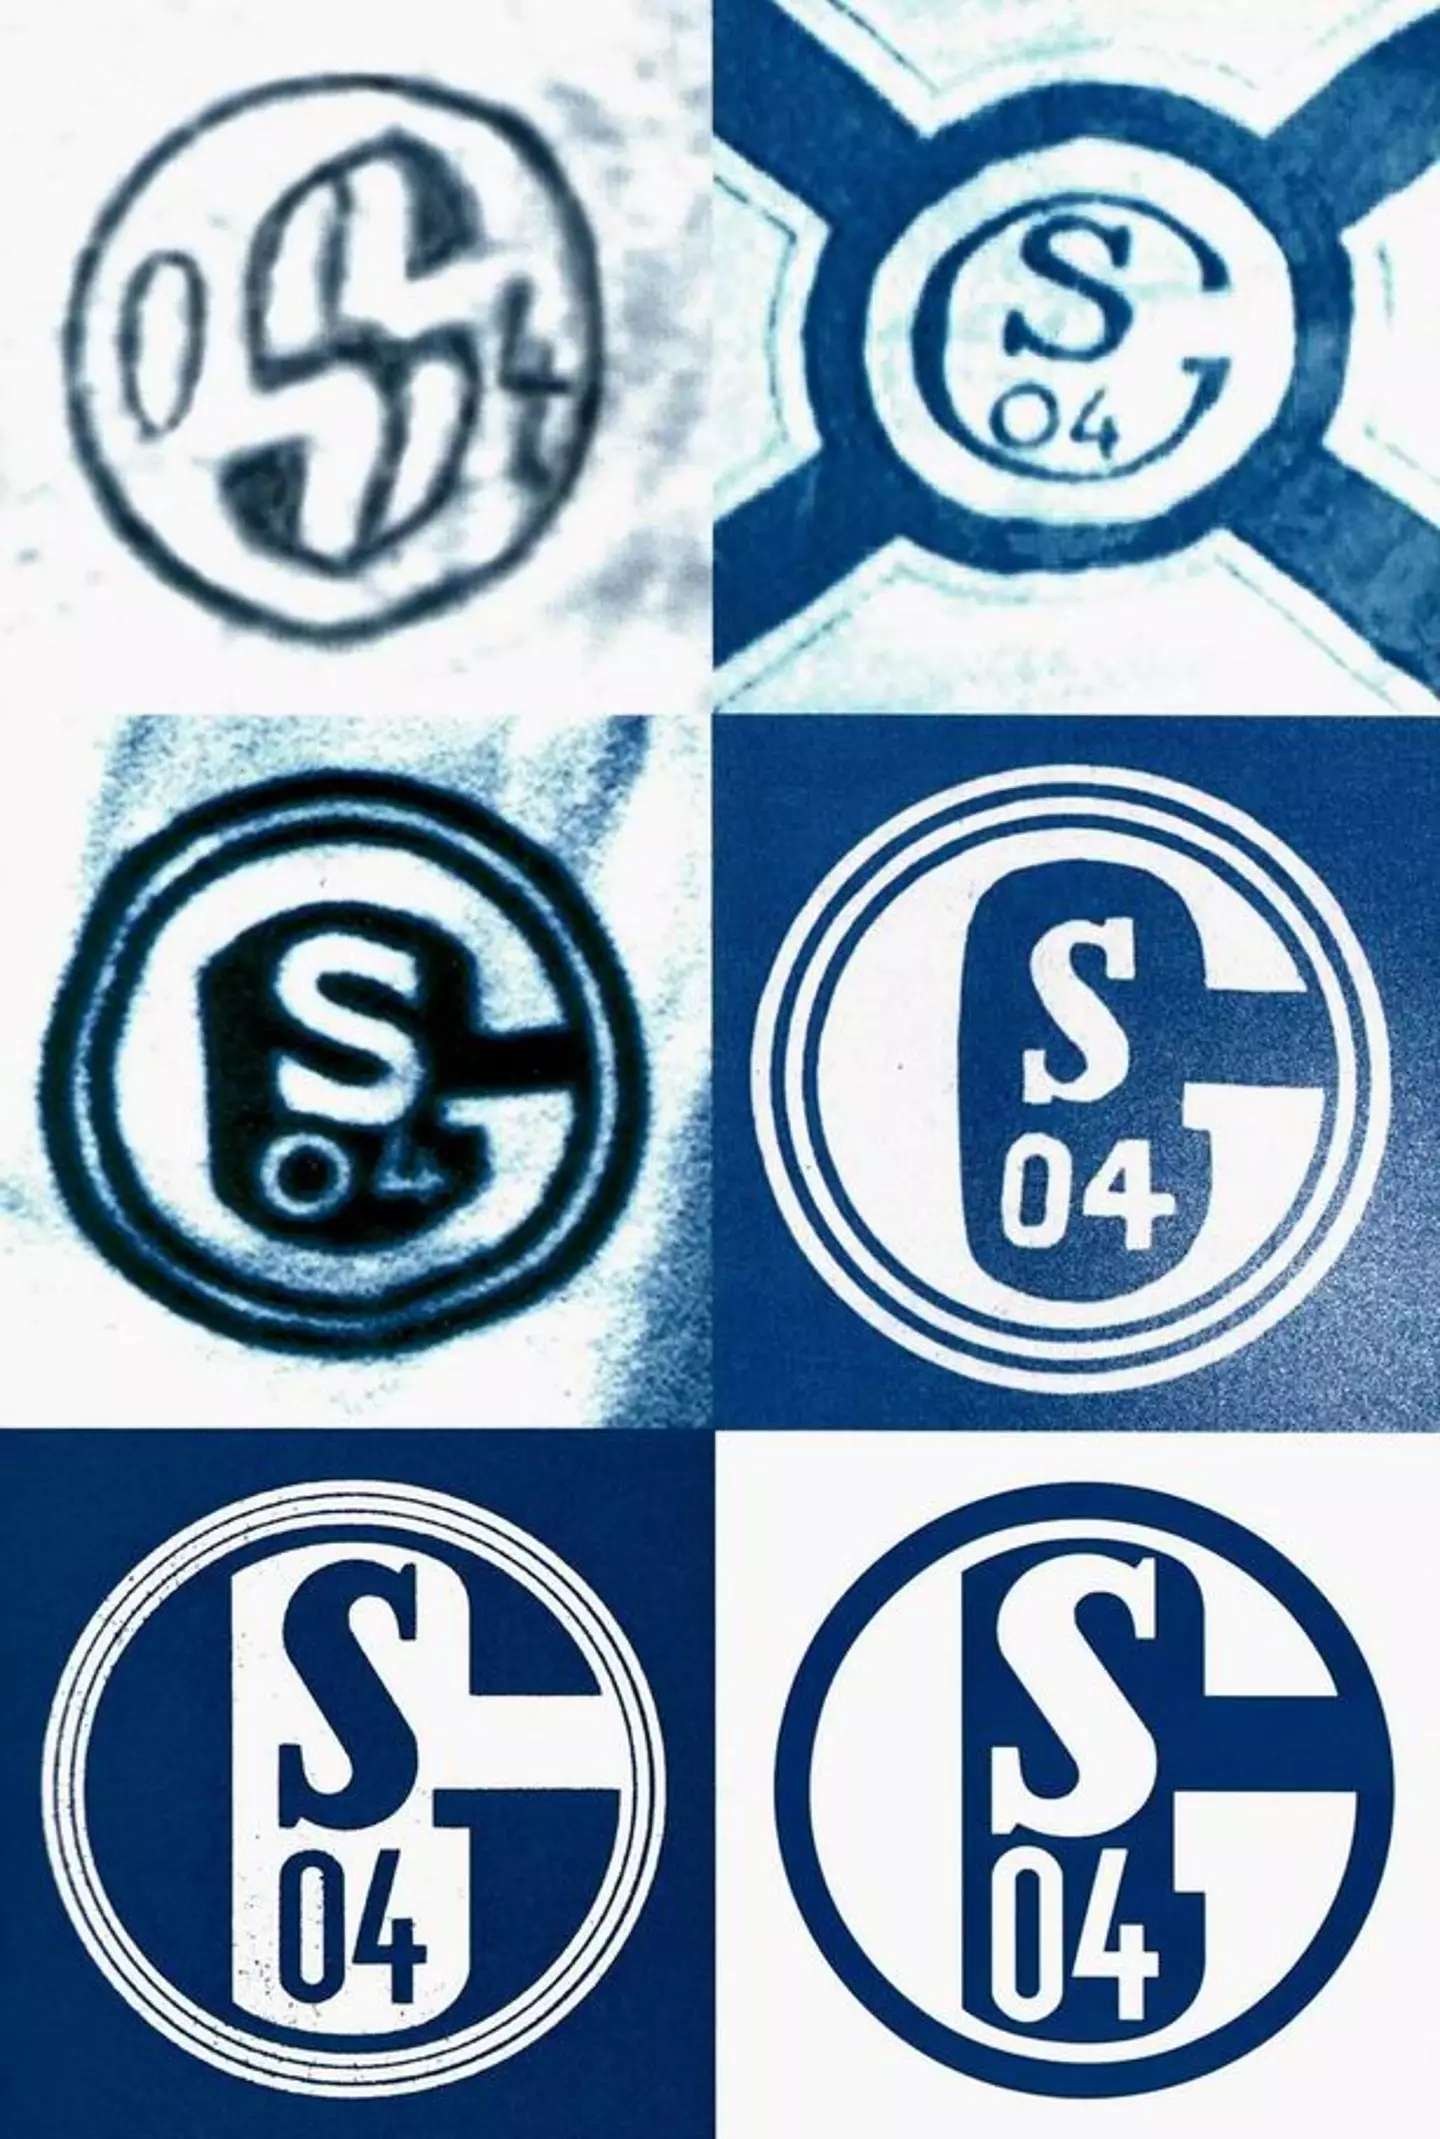 Schalke's badge through the ages. Image